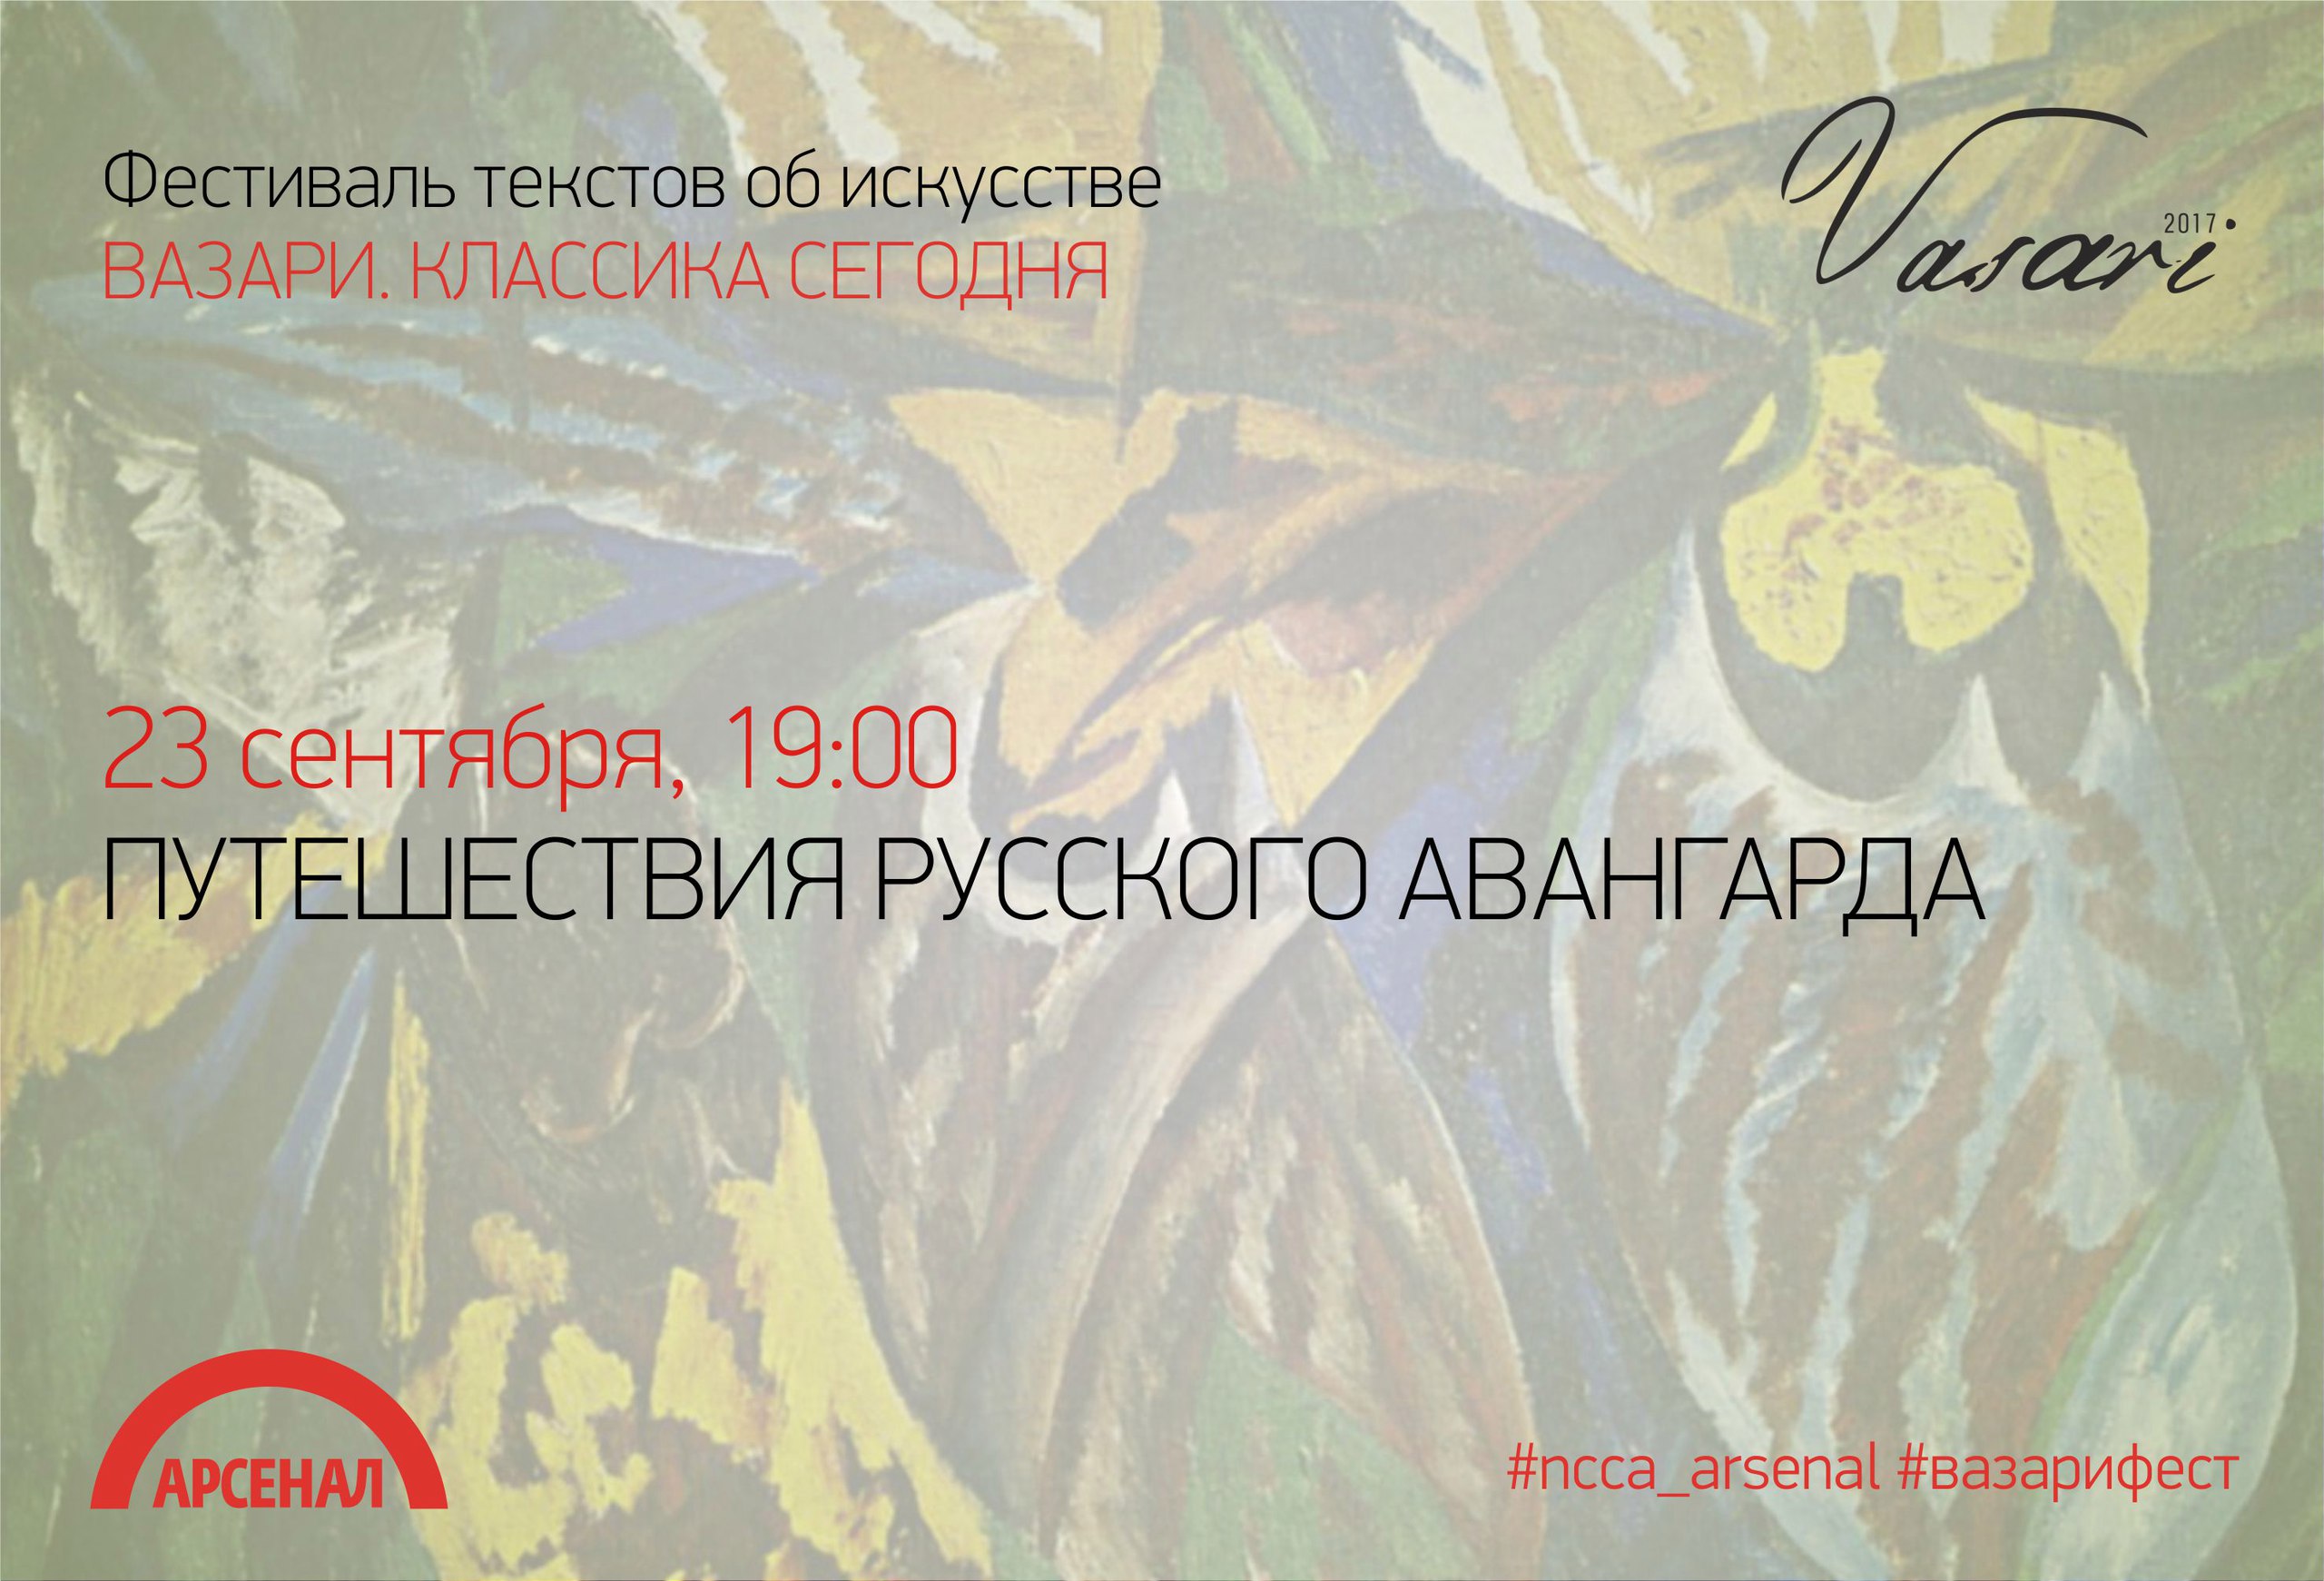 Lecture of Andrei Sarabyanov Travels of the Russian avant-garde. Mikhail Larionov and Natalia Goncharova. Years in Russia